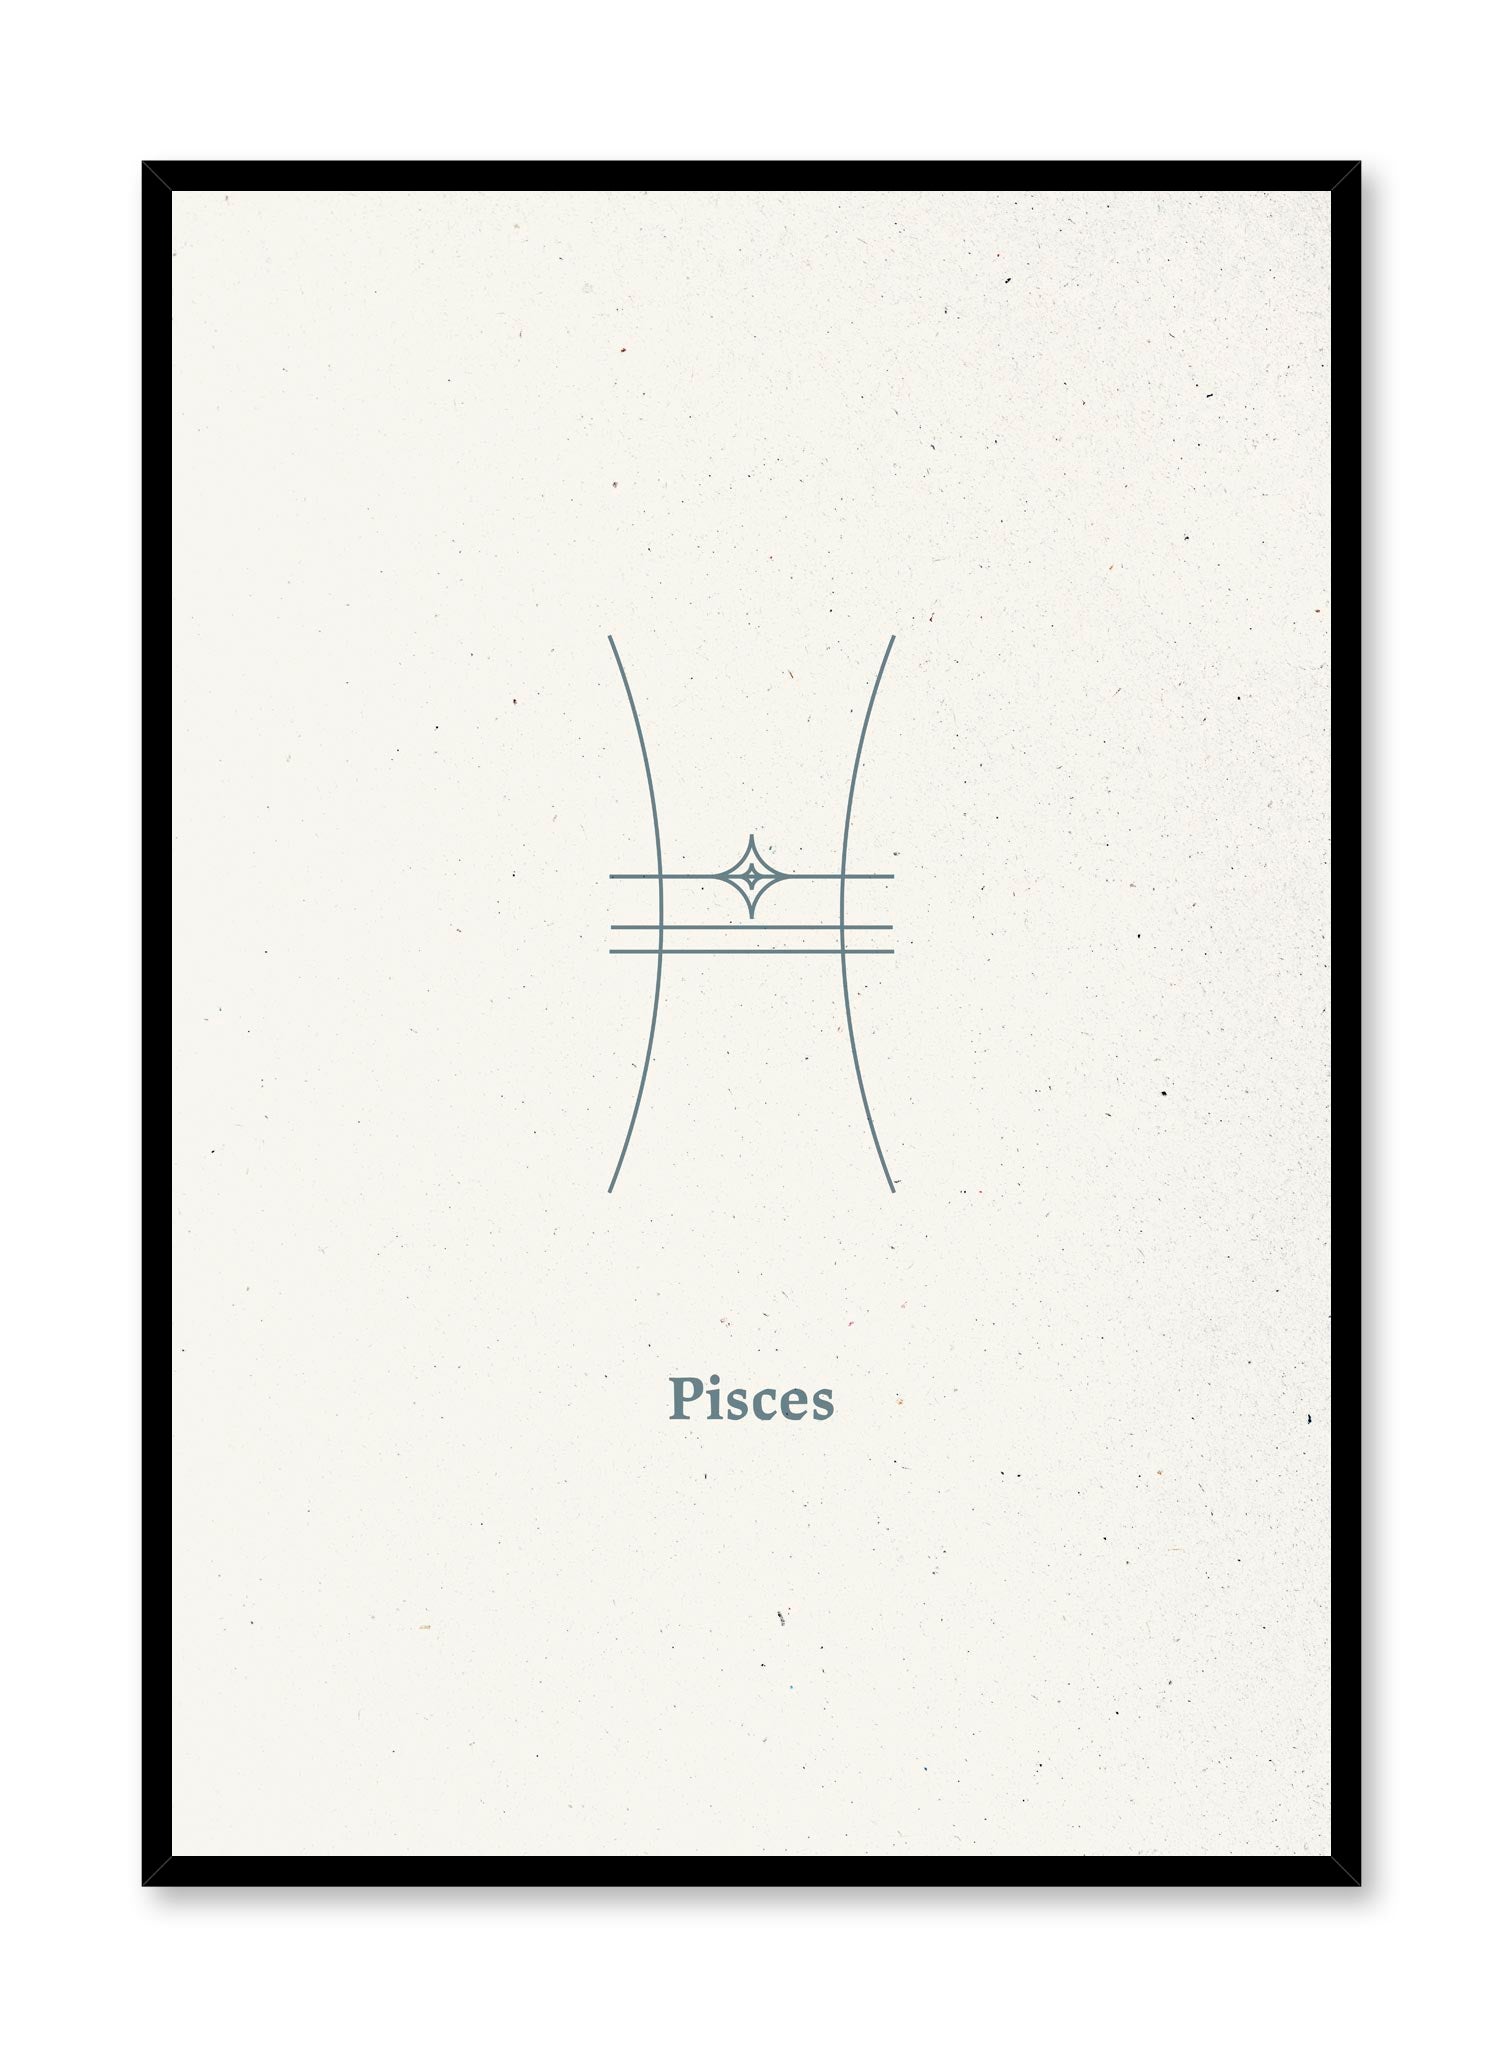 Minimalist celestial illustration poster by Opposite Wall with Pisces symbol